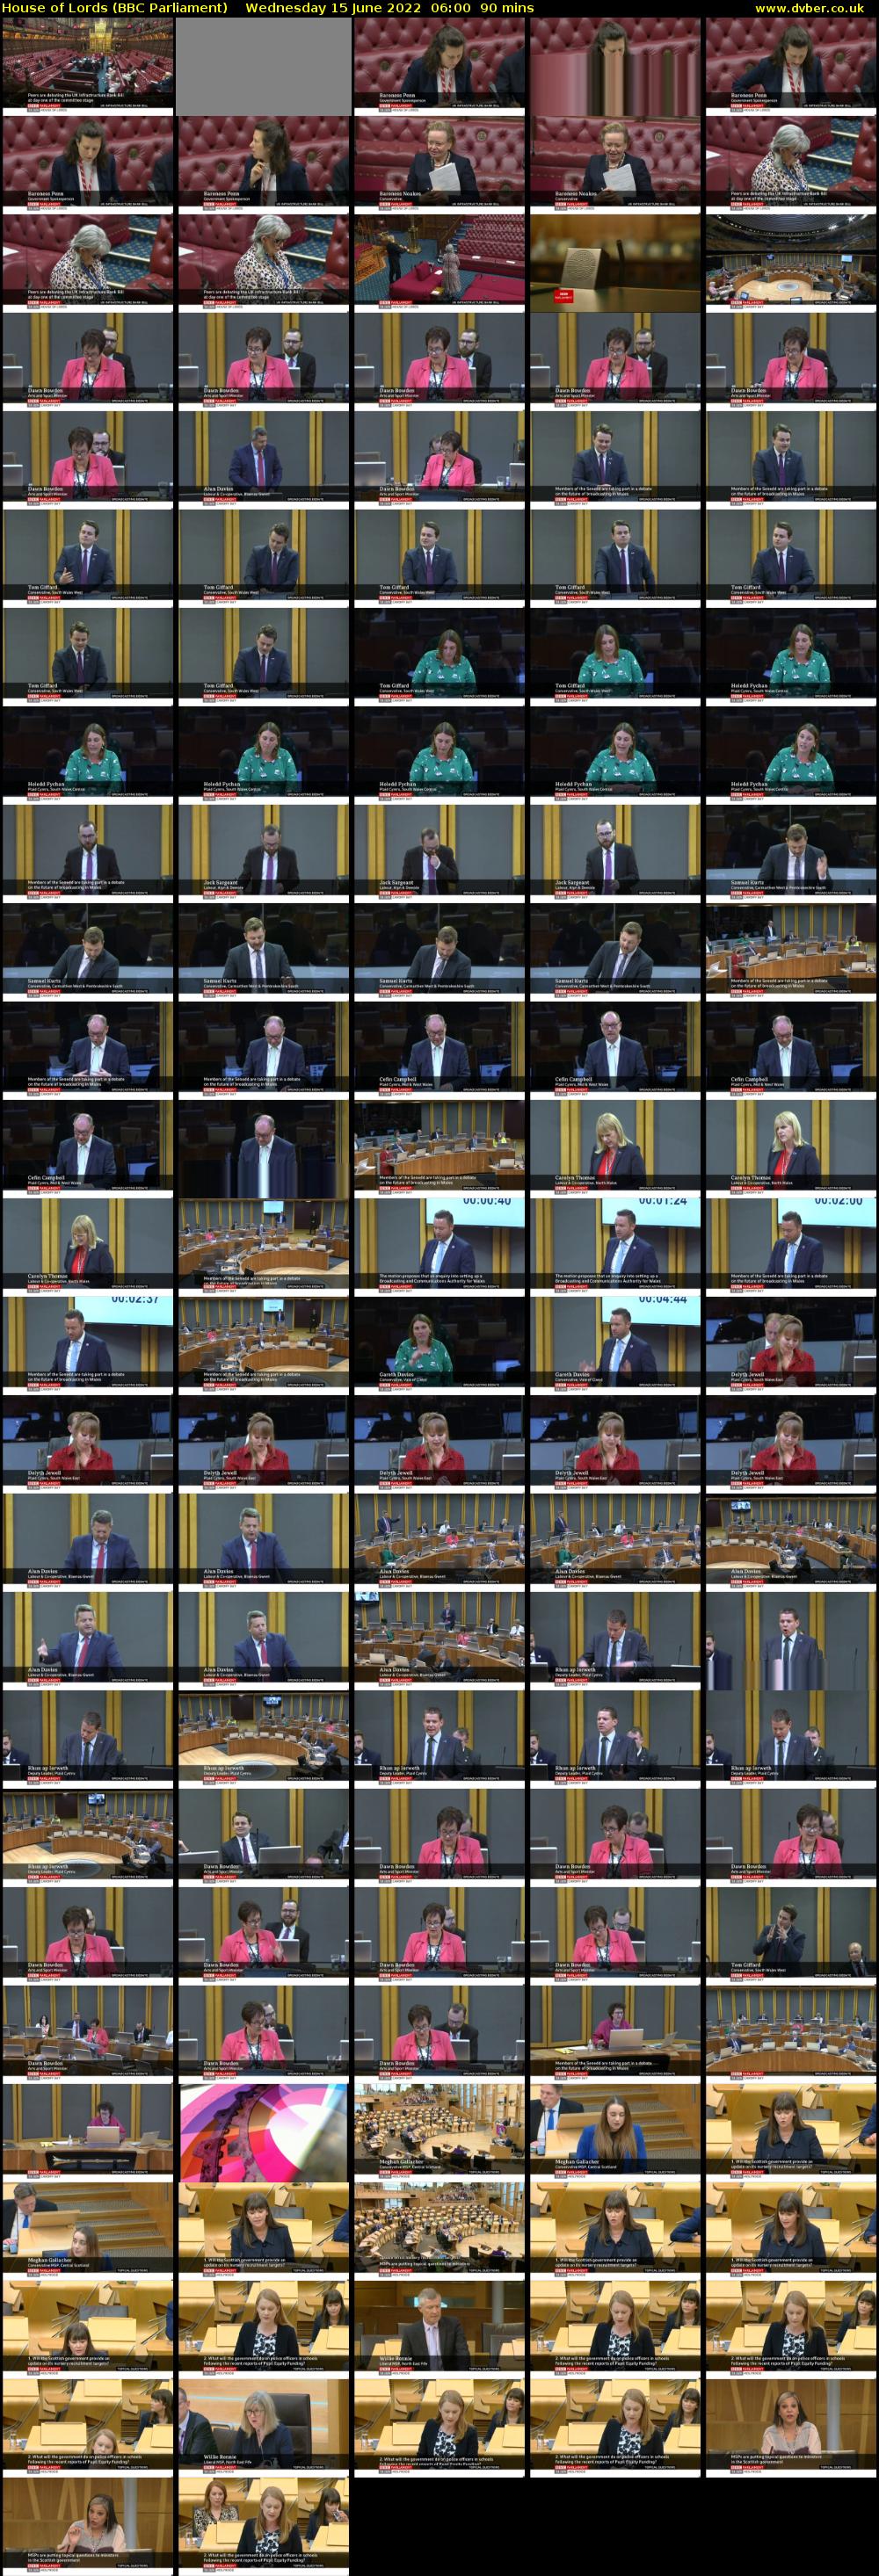 House of Lords (BBC Parliament) Wednesday 15 June 2022 06:00 - 07:30